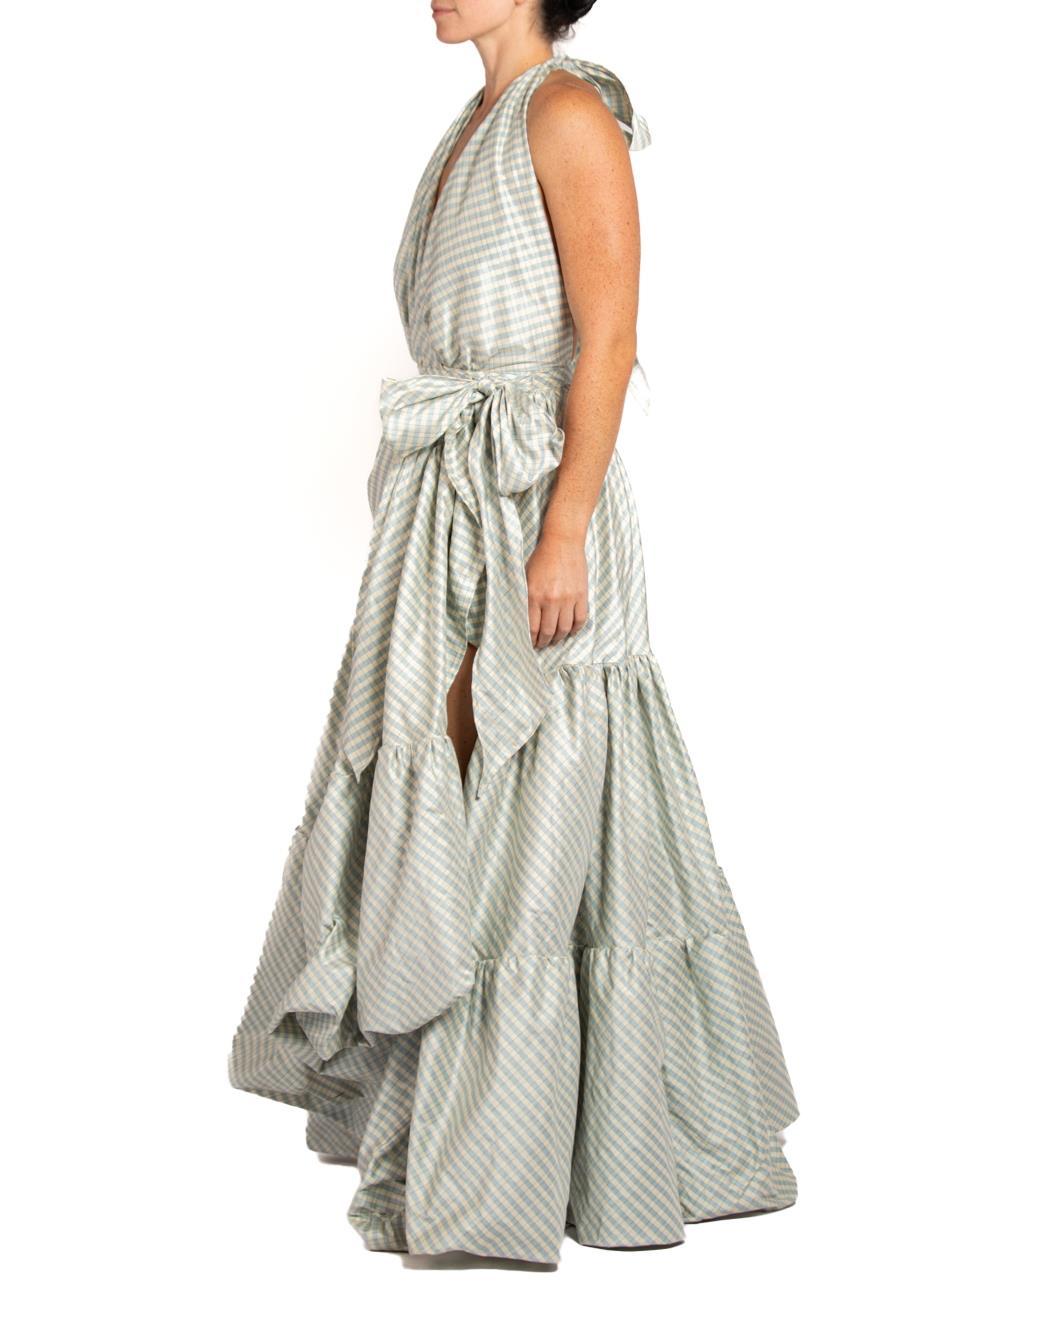 MORPHEW COLLECTION Cream & Blue Silk Taffeta Plaid Gown
MORPHEW COLLECTION is made entirely by hand in our NYC Ateliér of rare antique materials sourced from around the globe. Our sustainable vintage materials represent over a century of design,